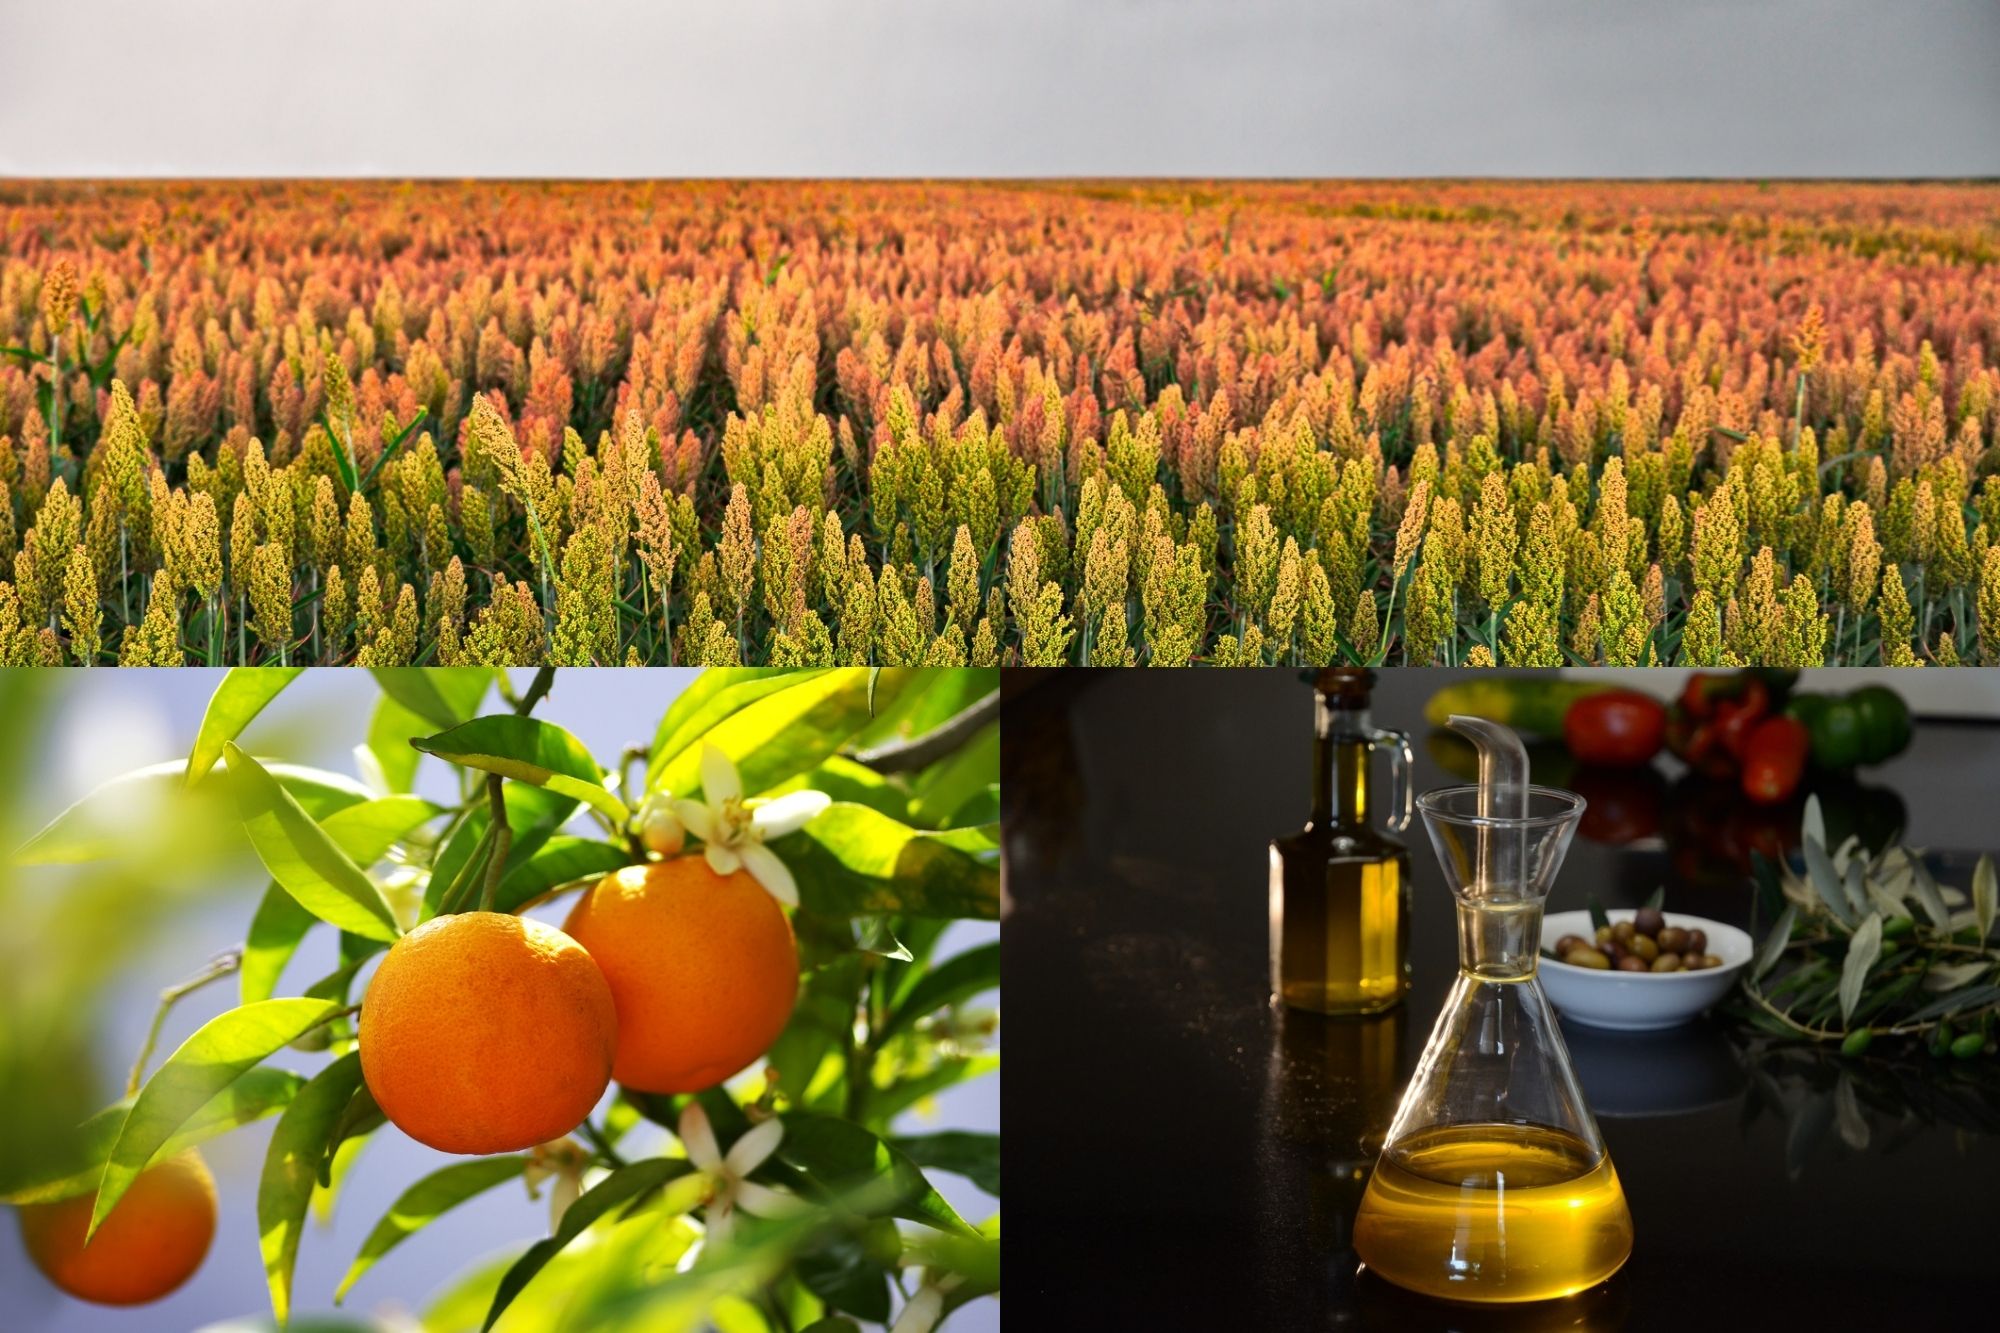 Triptych, top image is a field of sorghum, bottom left image are three oranges growing on a branch and orange blossoms, bottom right is a carafe of olive oil, with a bottle of olive oil, bowl of olives, herbs, and vegetables in the background.